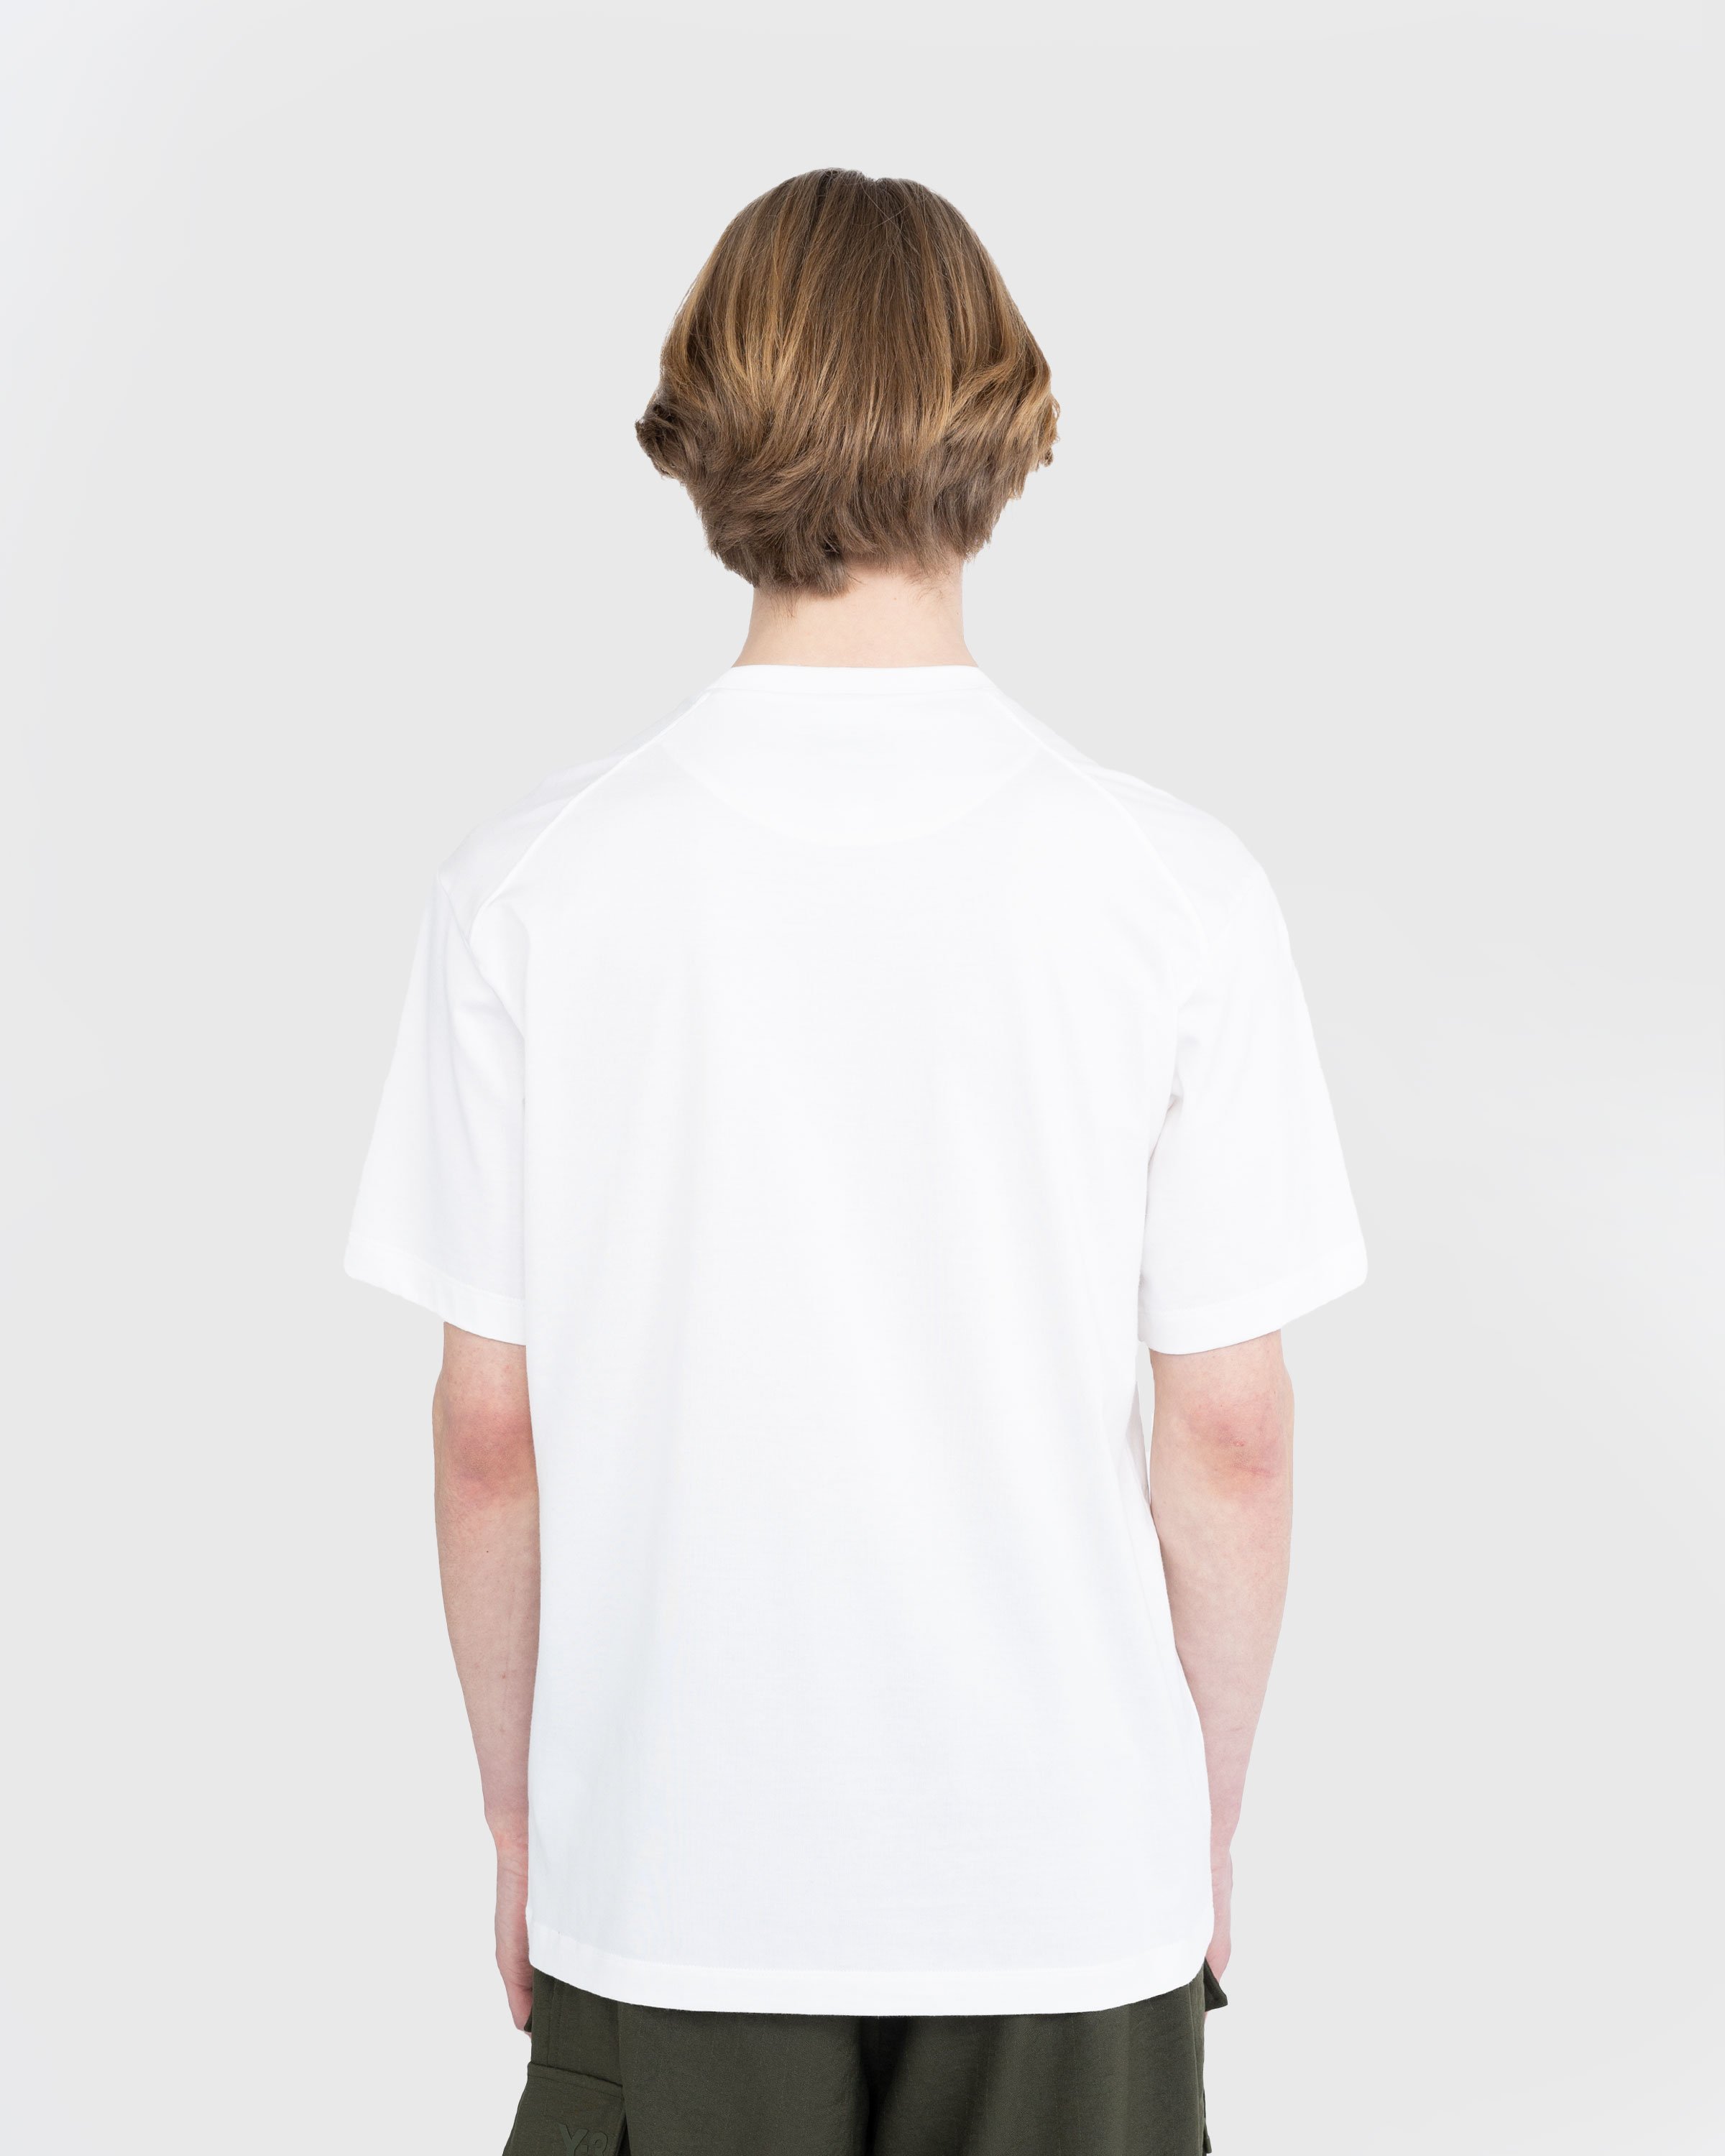 Y-3 - CL C T-Shirt - Clothing - White - Image 3